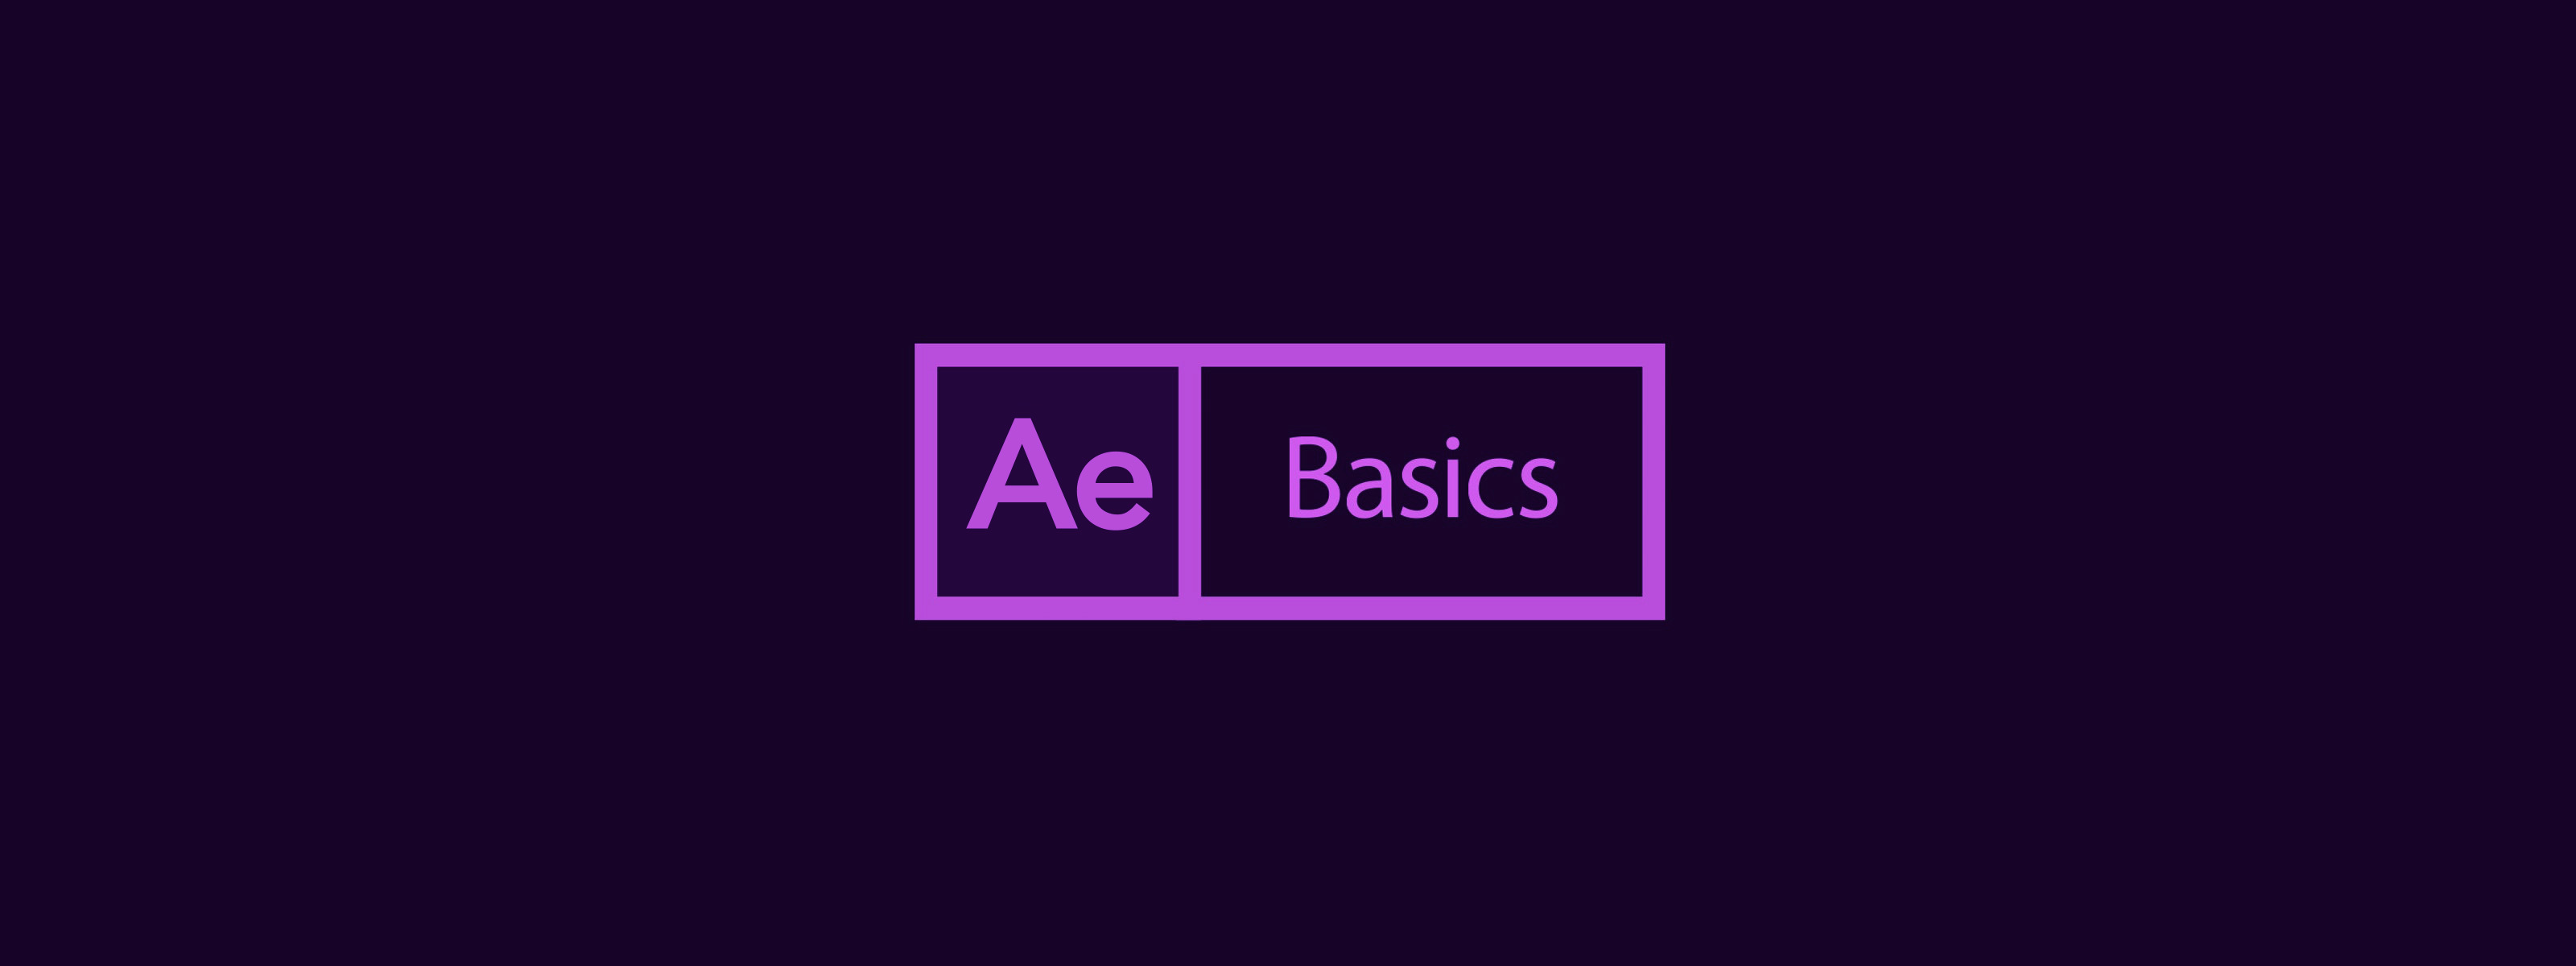 adobe after effects tutorials for beginners pdf